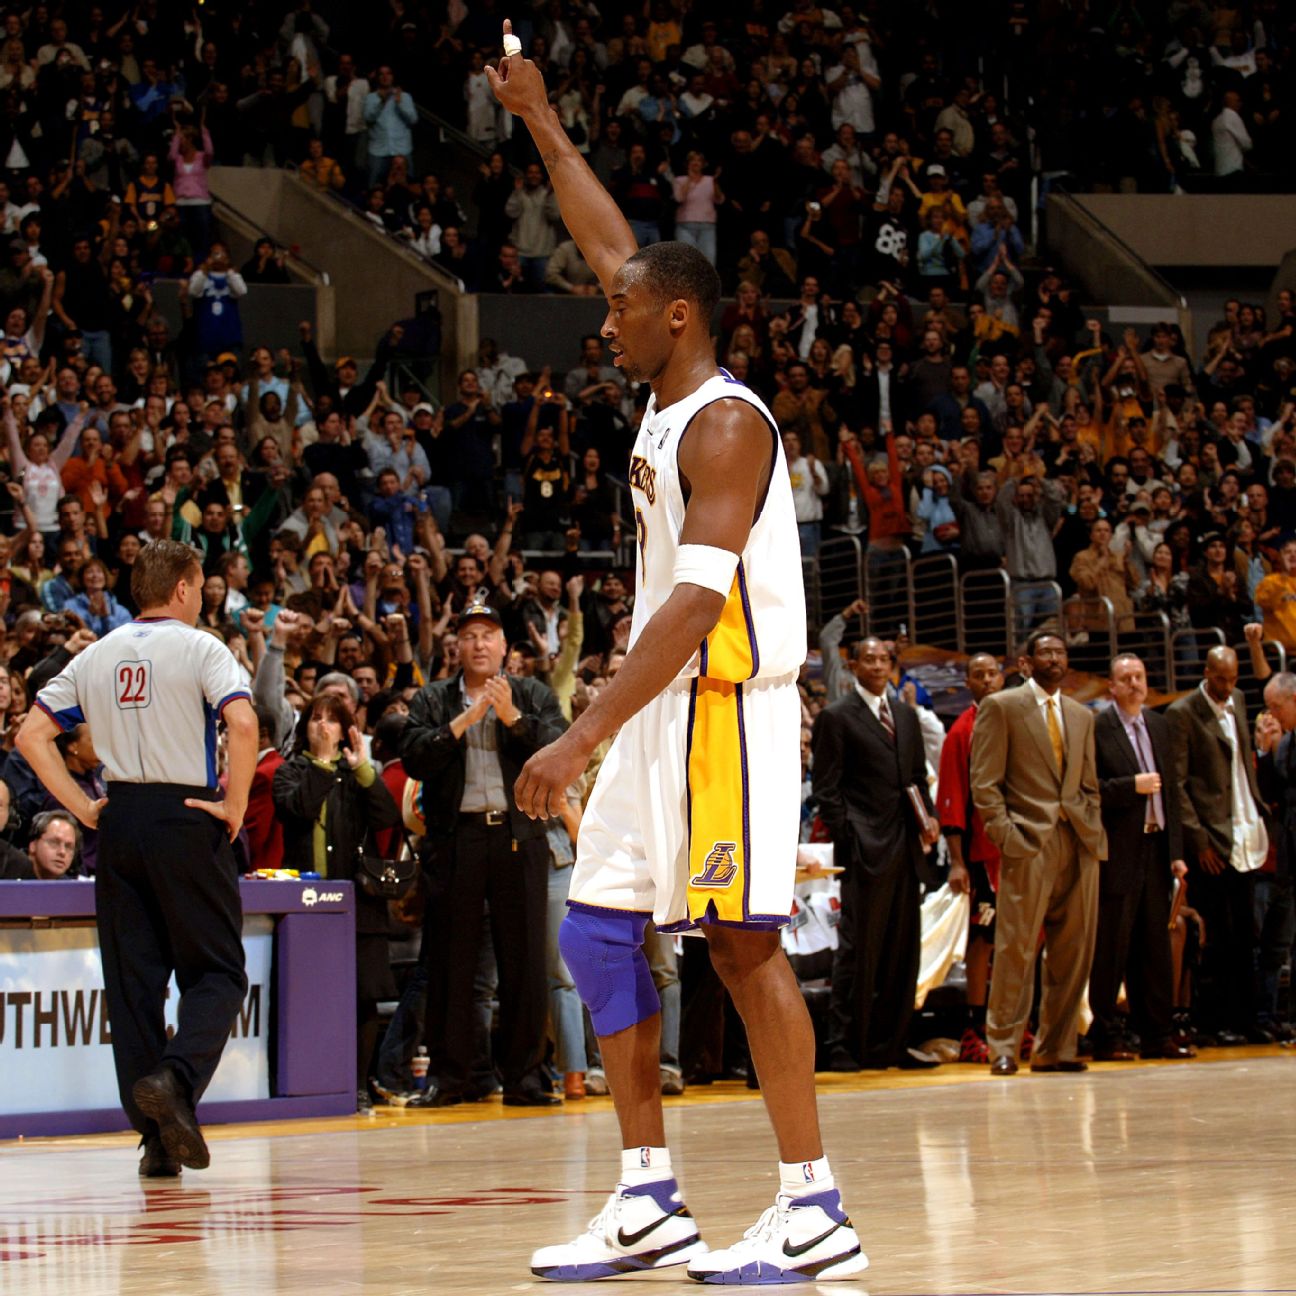 How Los Angeles Lakers' Kobe Bryant made history with 81-point game1296 x 1296